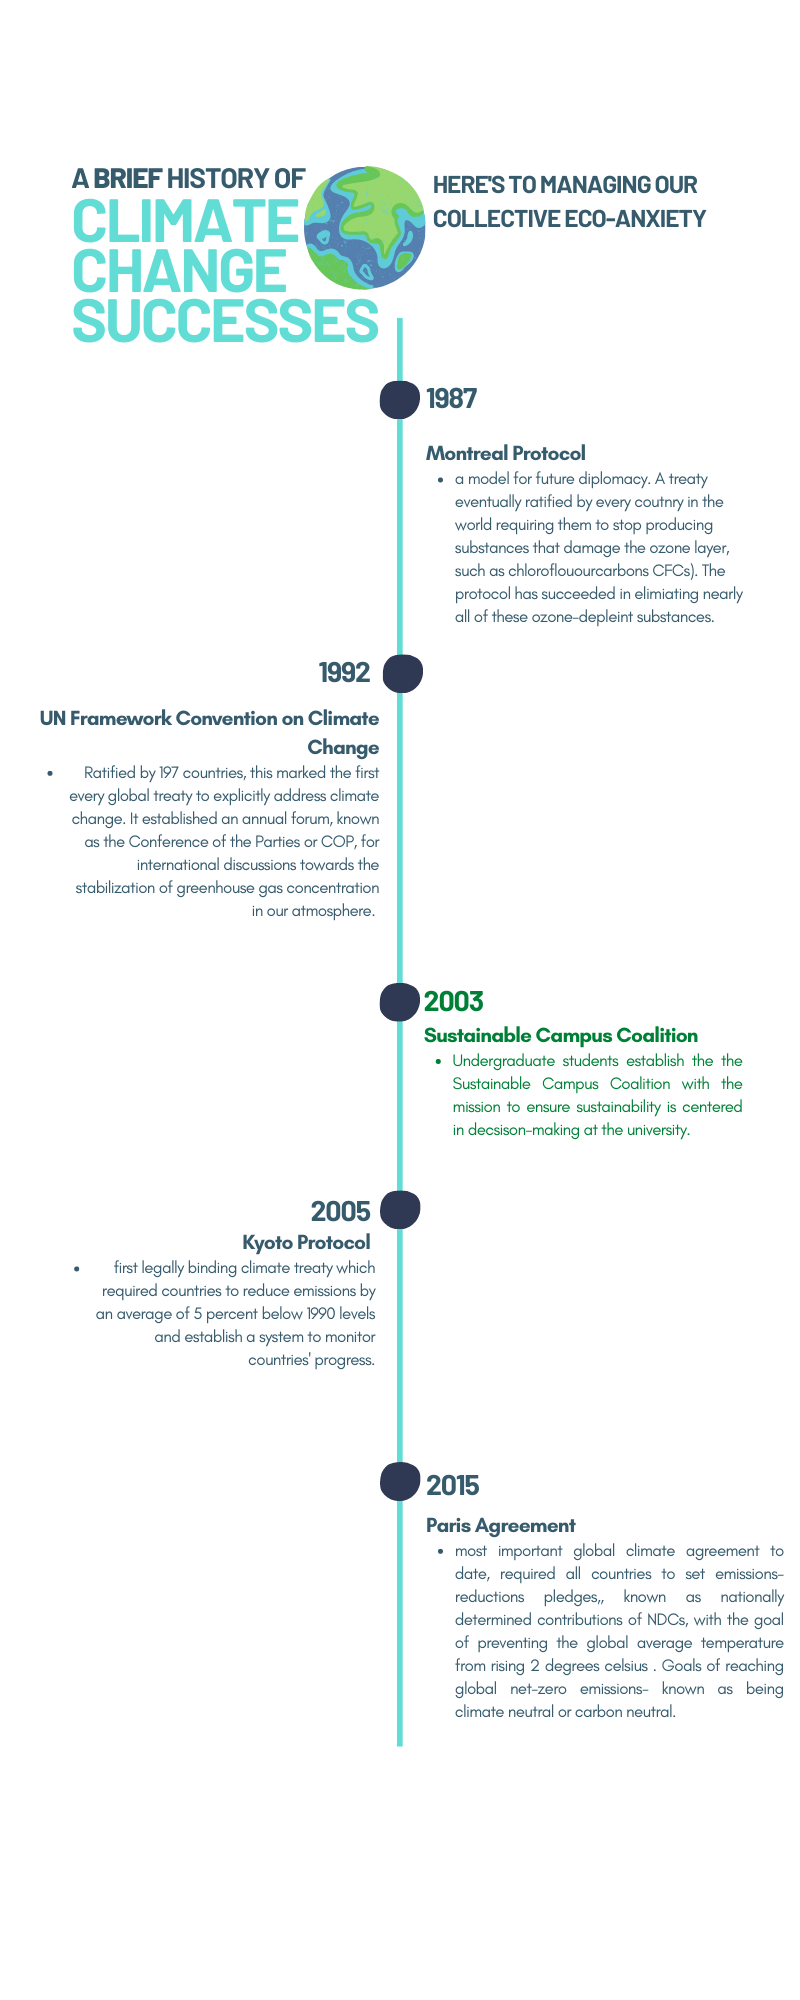 Timeline of historical successes of climate change action